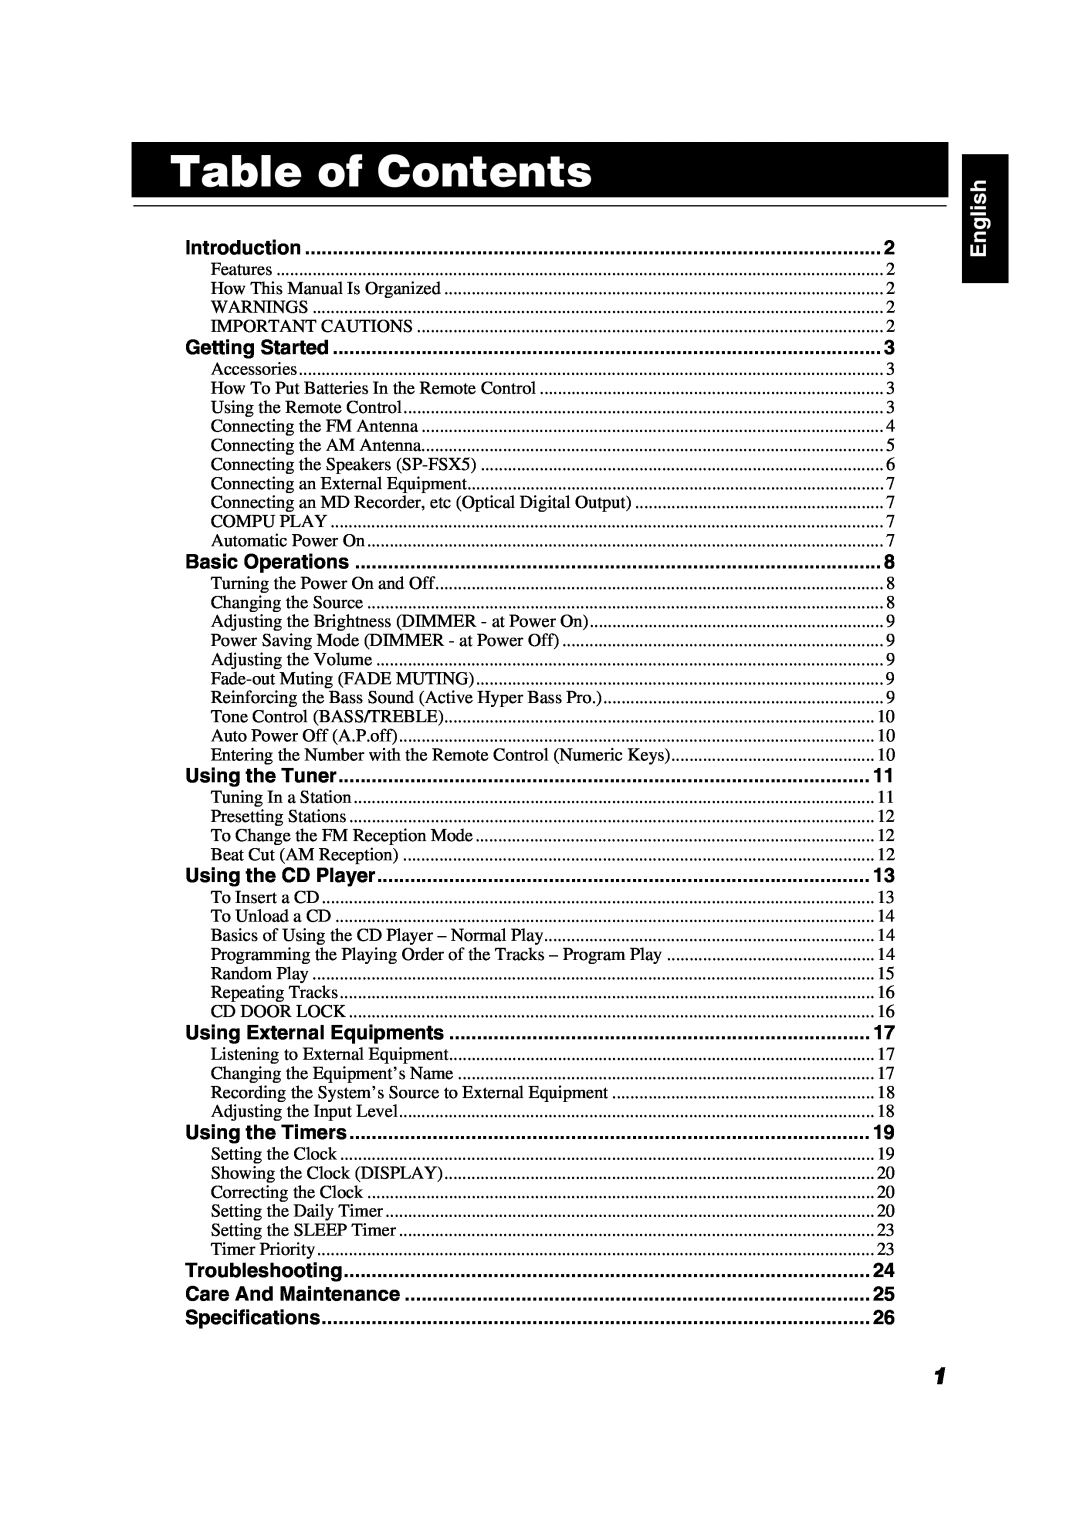 JVC FS-X5 manual Table of Contents, English 